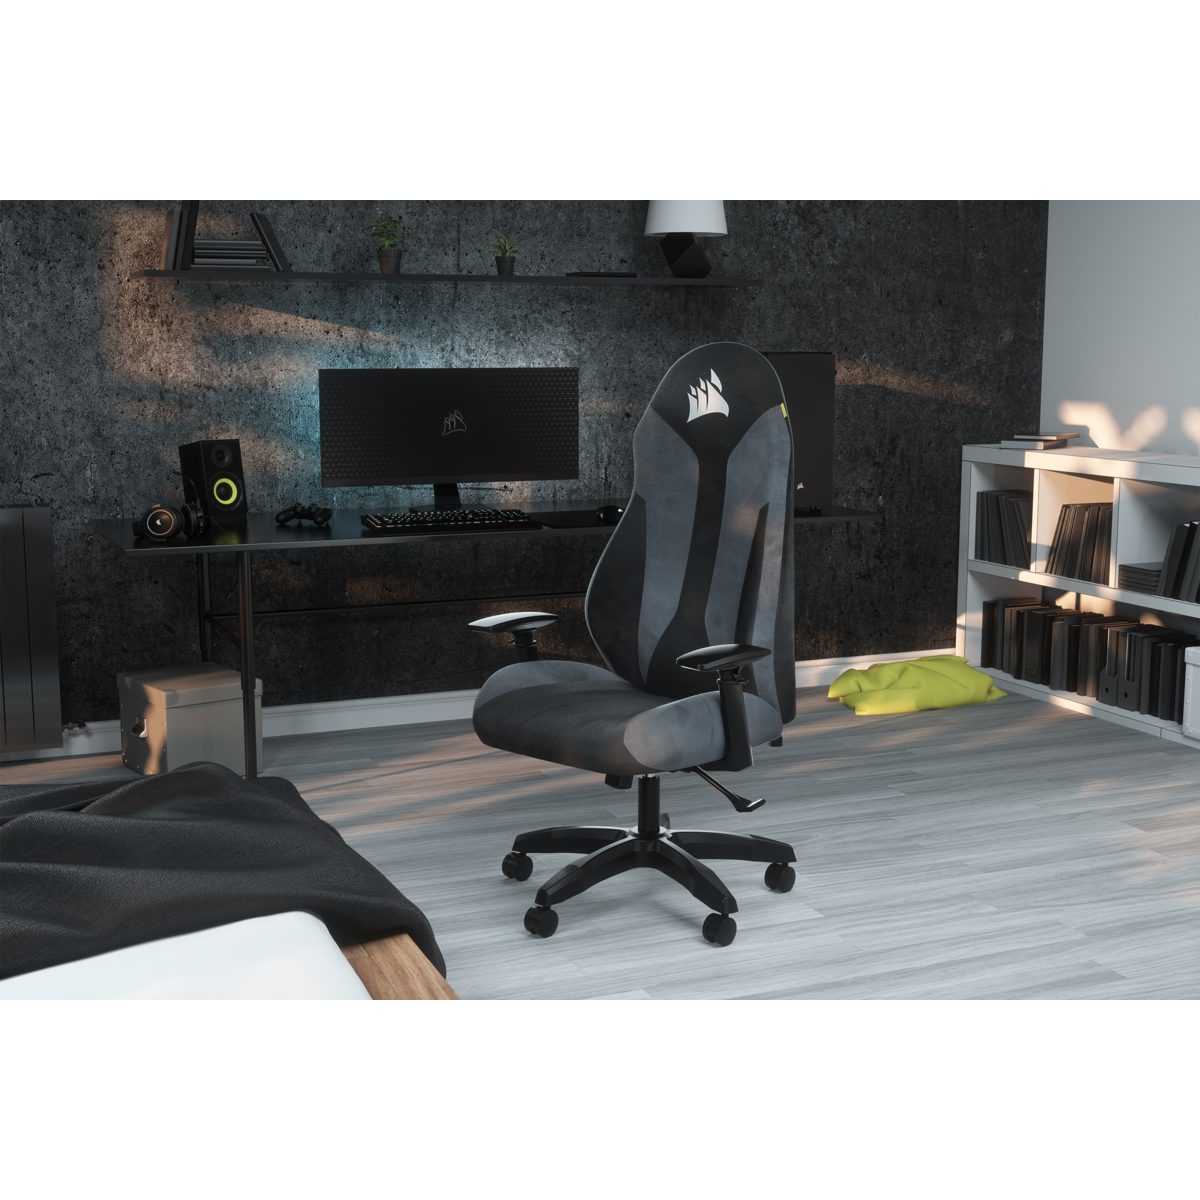 Corsair TC60 FABRIC Gaming Chair — Grey Relaxed Fit CF-9010035WW-Gaming Chair-Corsair-computerspace